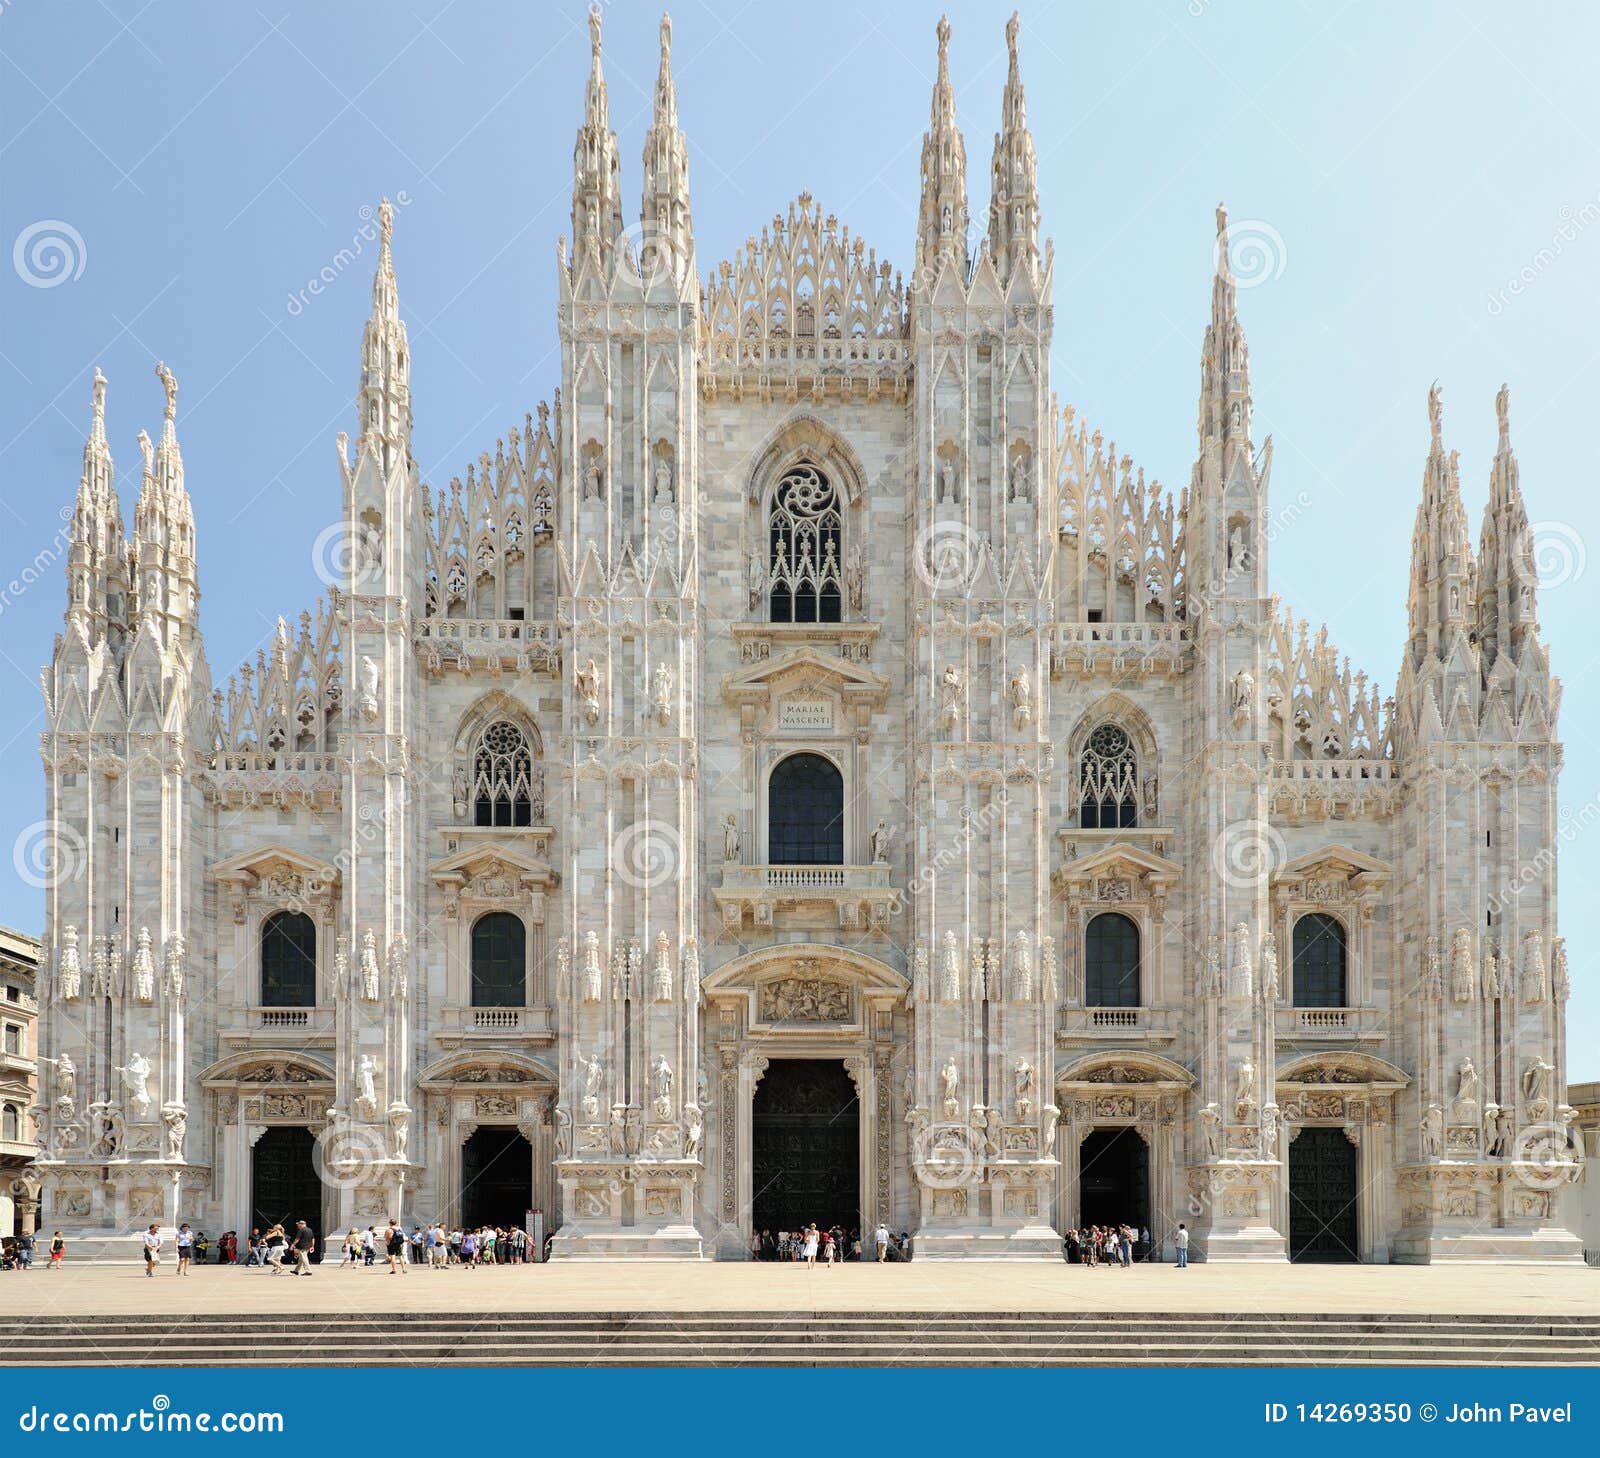 facade of milan cathedral (duomo), lombardy, italy